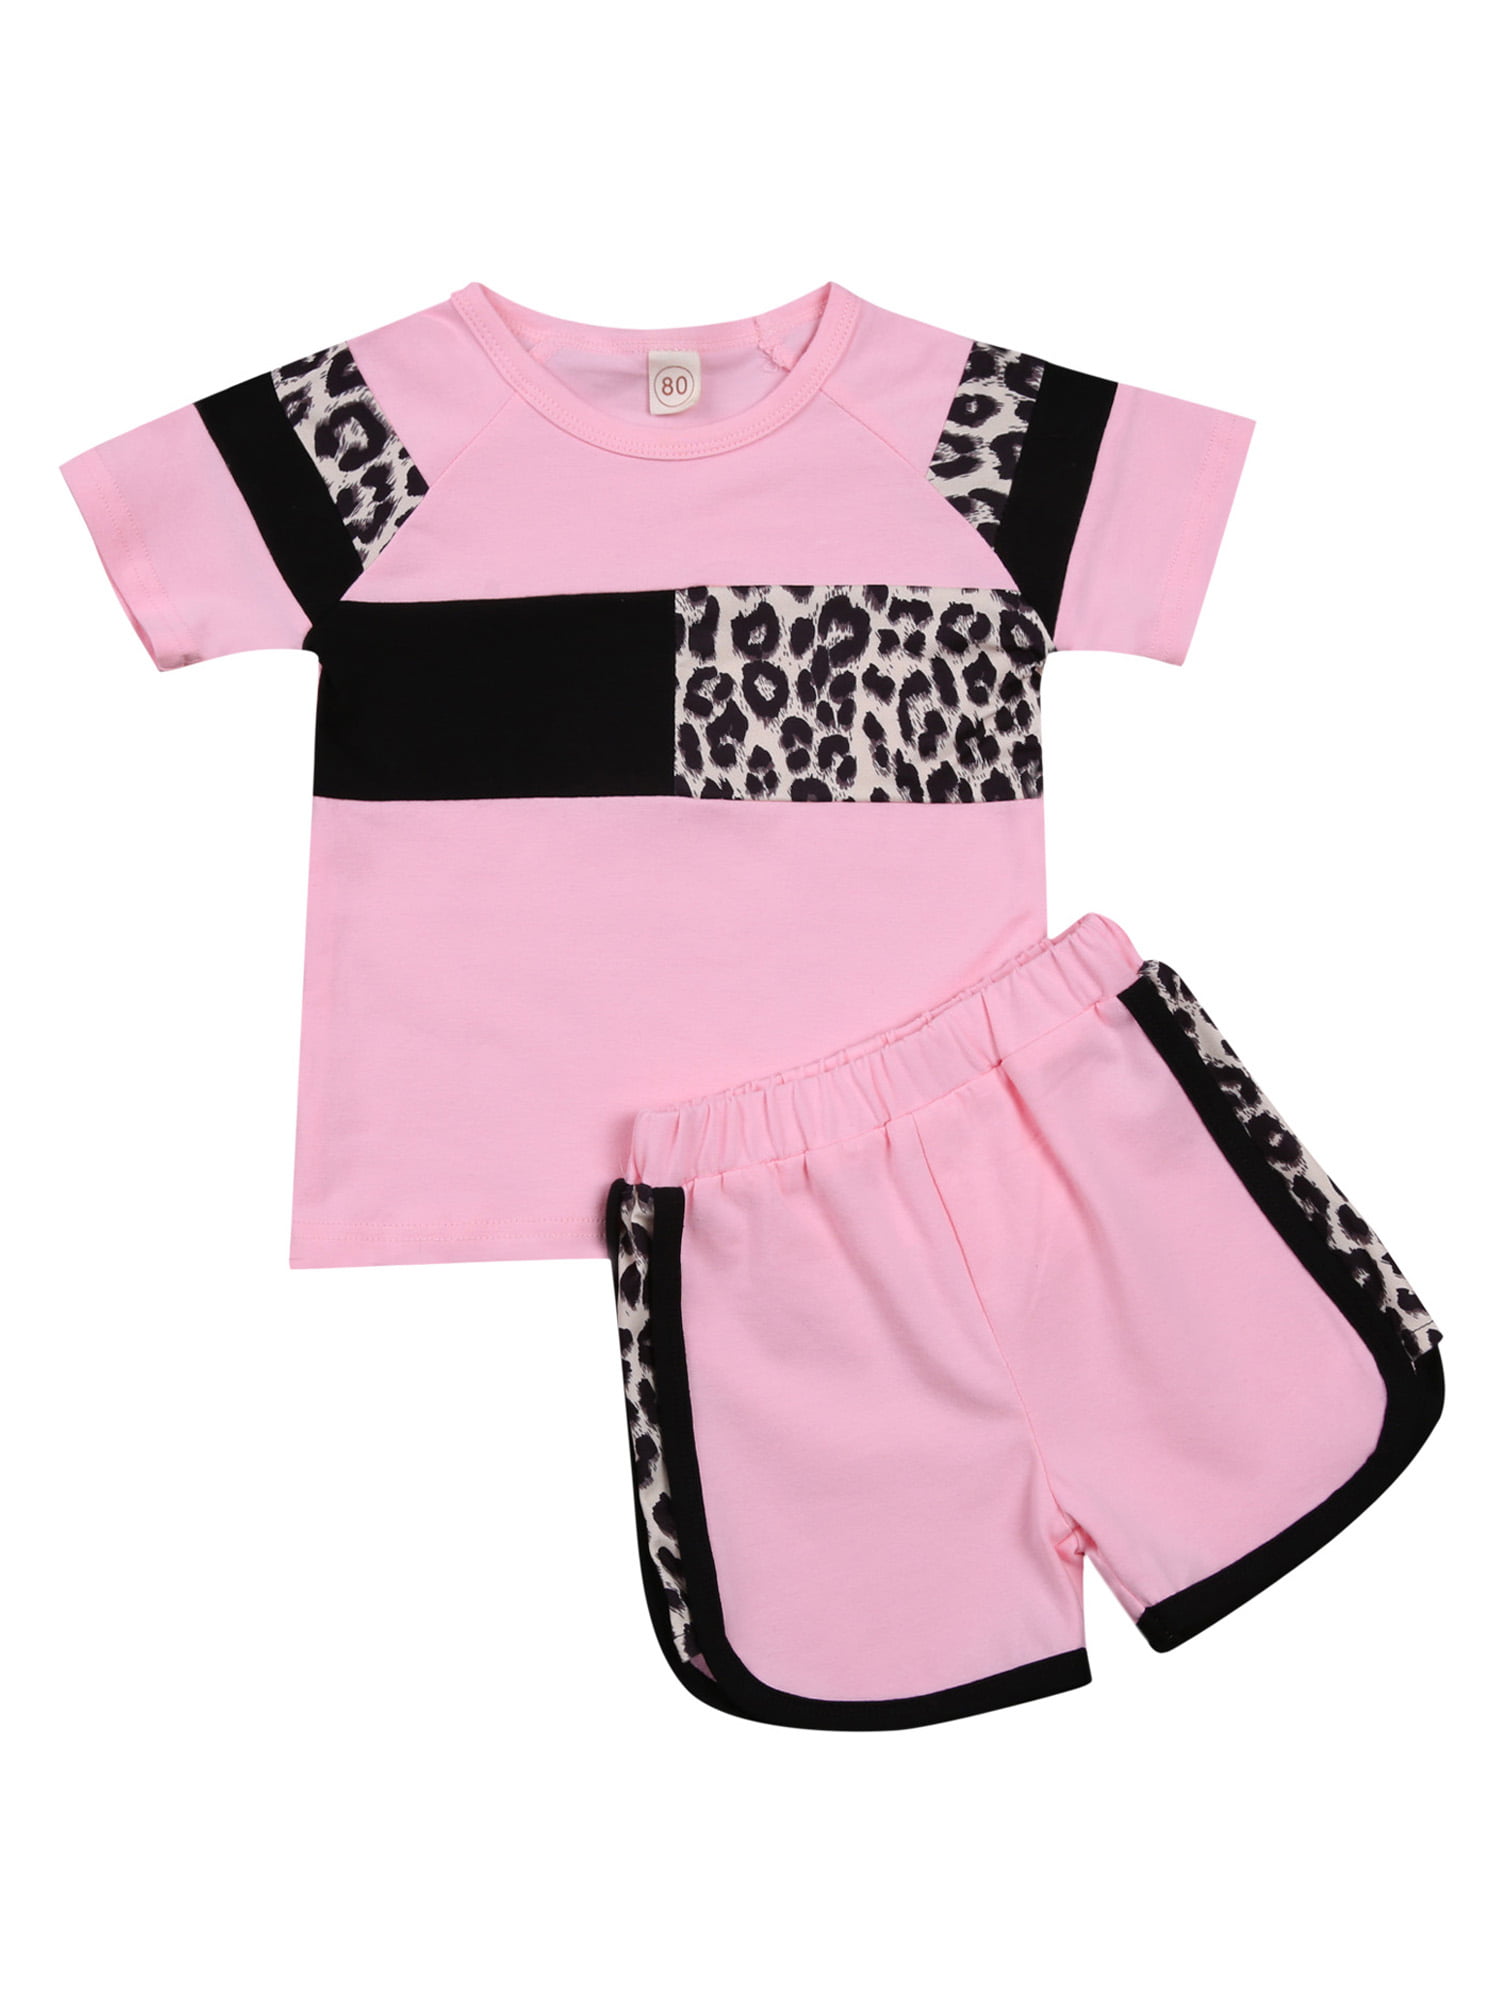 UK Newborn Baby Girl Outfits Striped Bow Patchwork Top Shirt Shorts 2PCS/Set